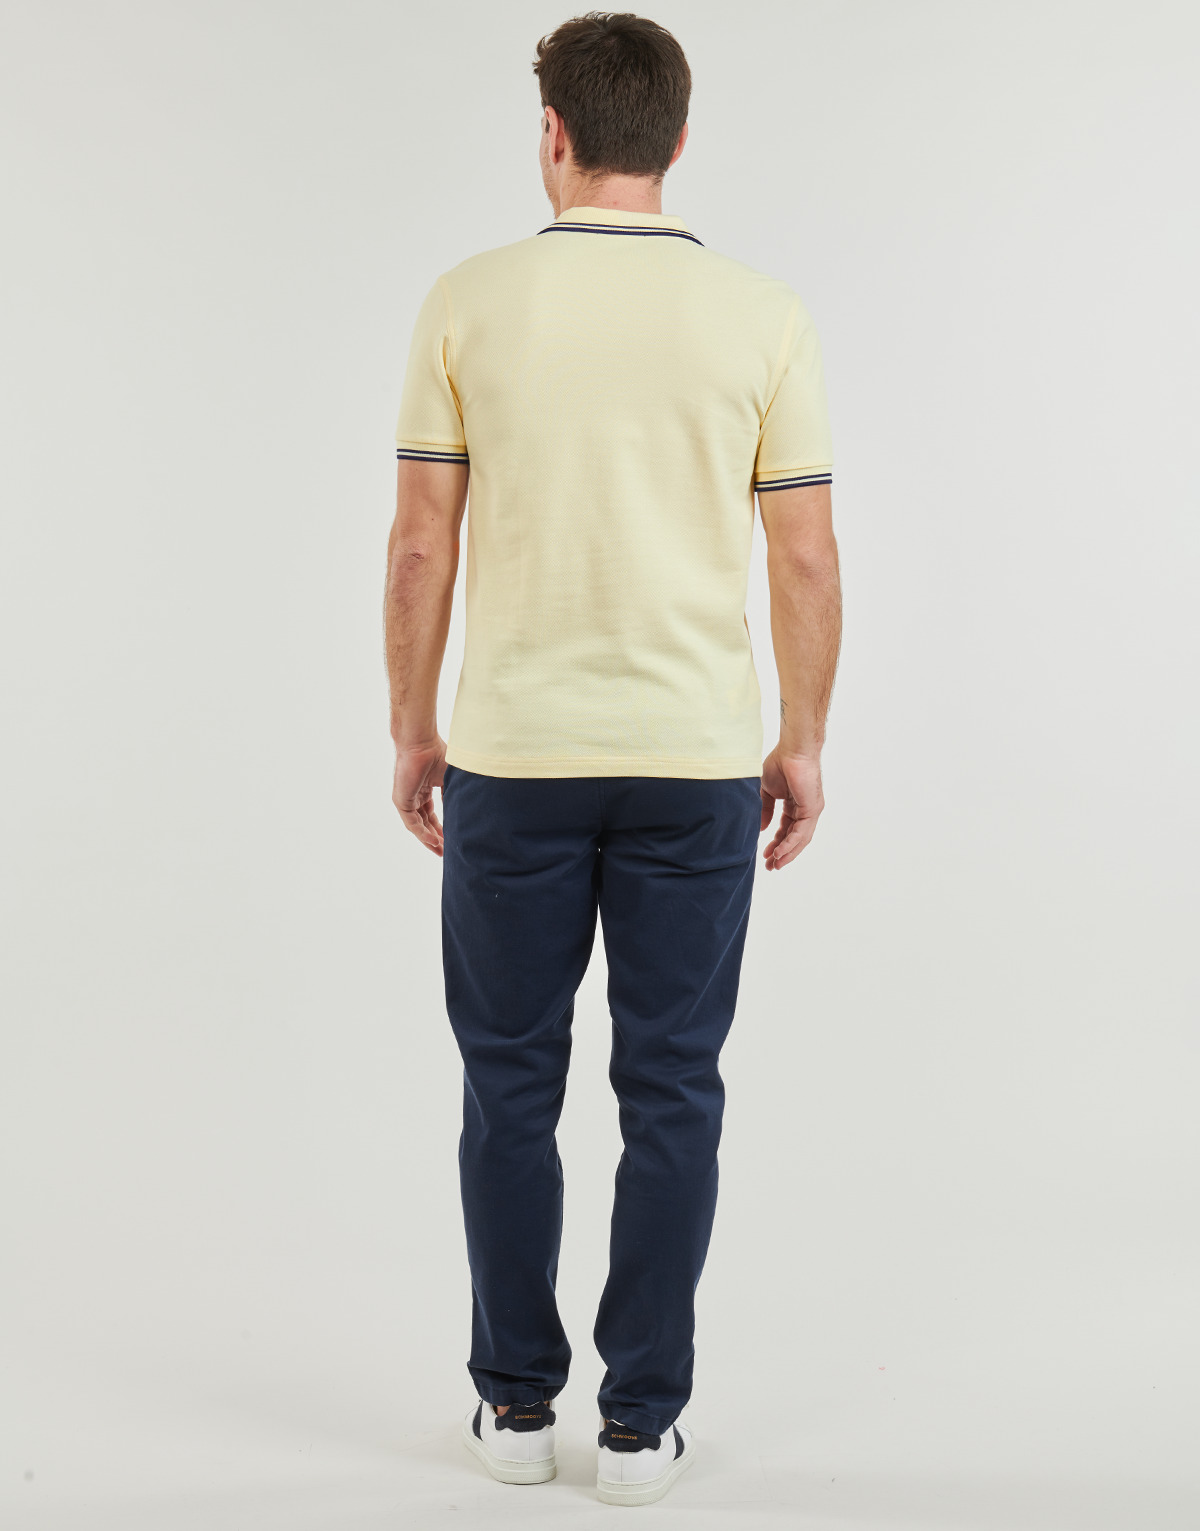 Fred Perry Jaune / Marine TWIN TIPPED FRED PERRY SHIRT rRAeH9cM